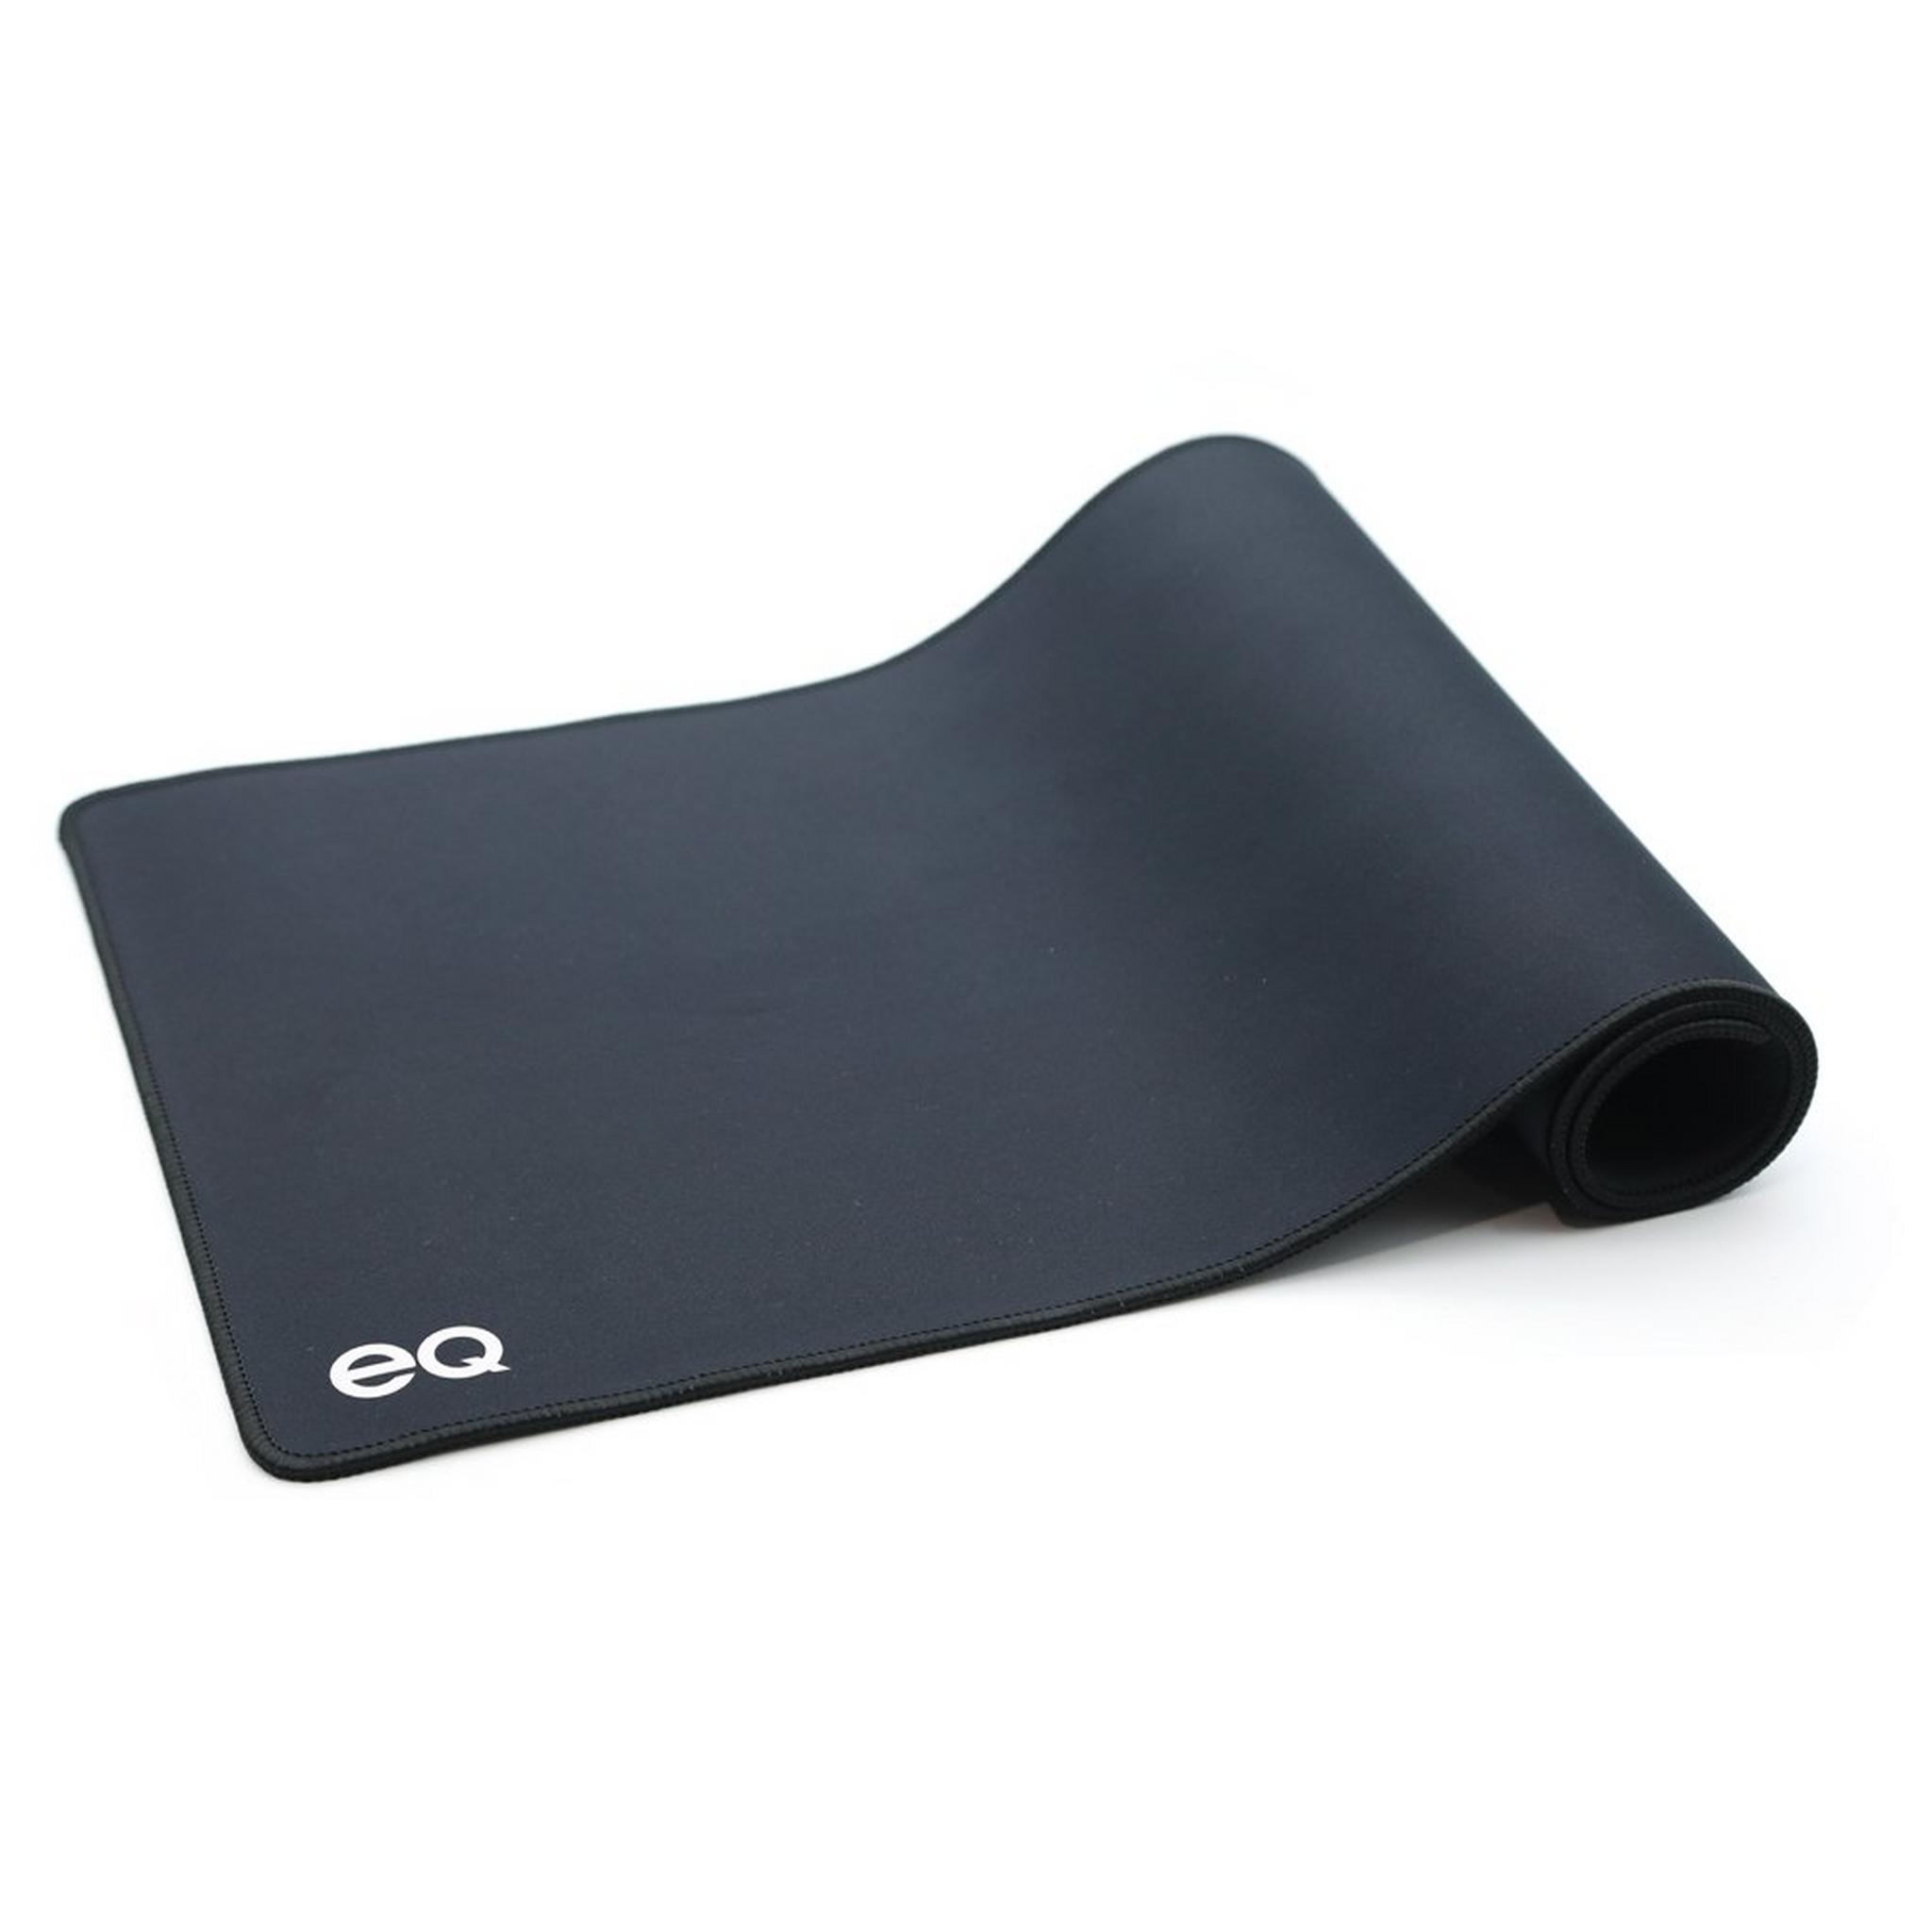 EQ Water-Proof Rubber Mouse Pad - Black